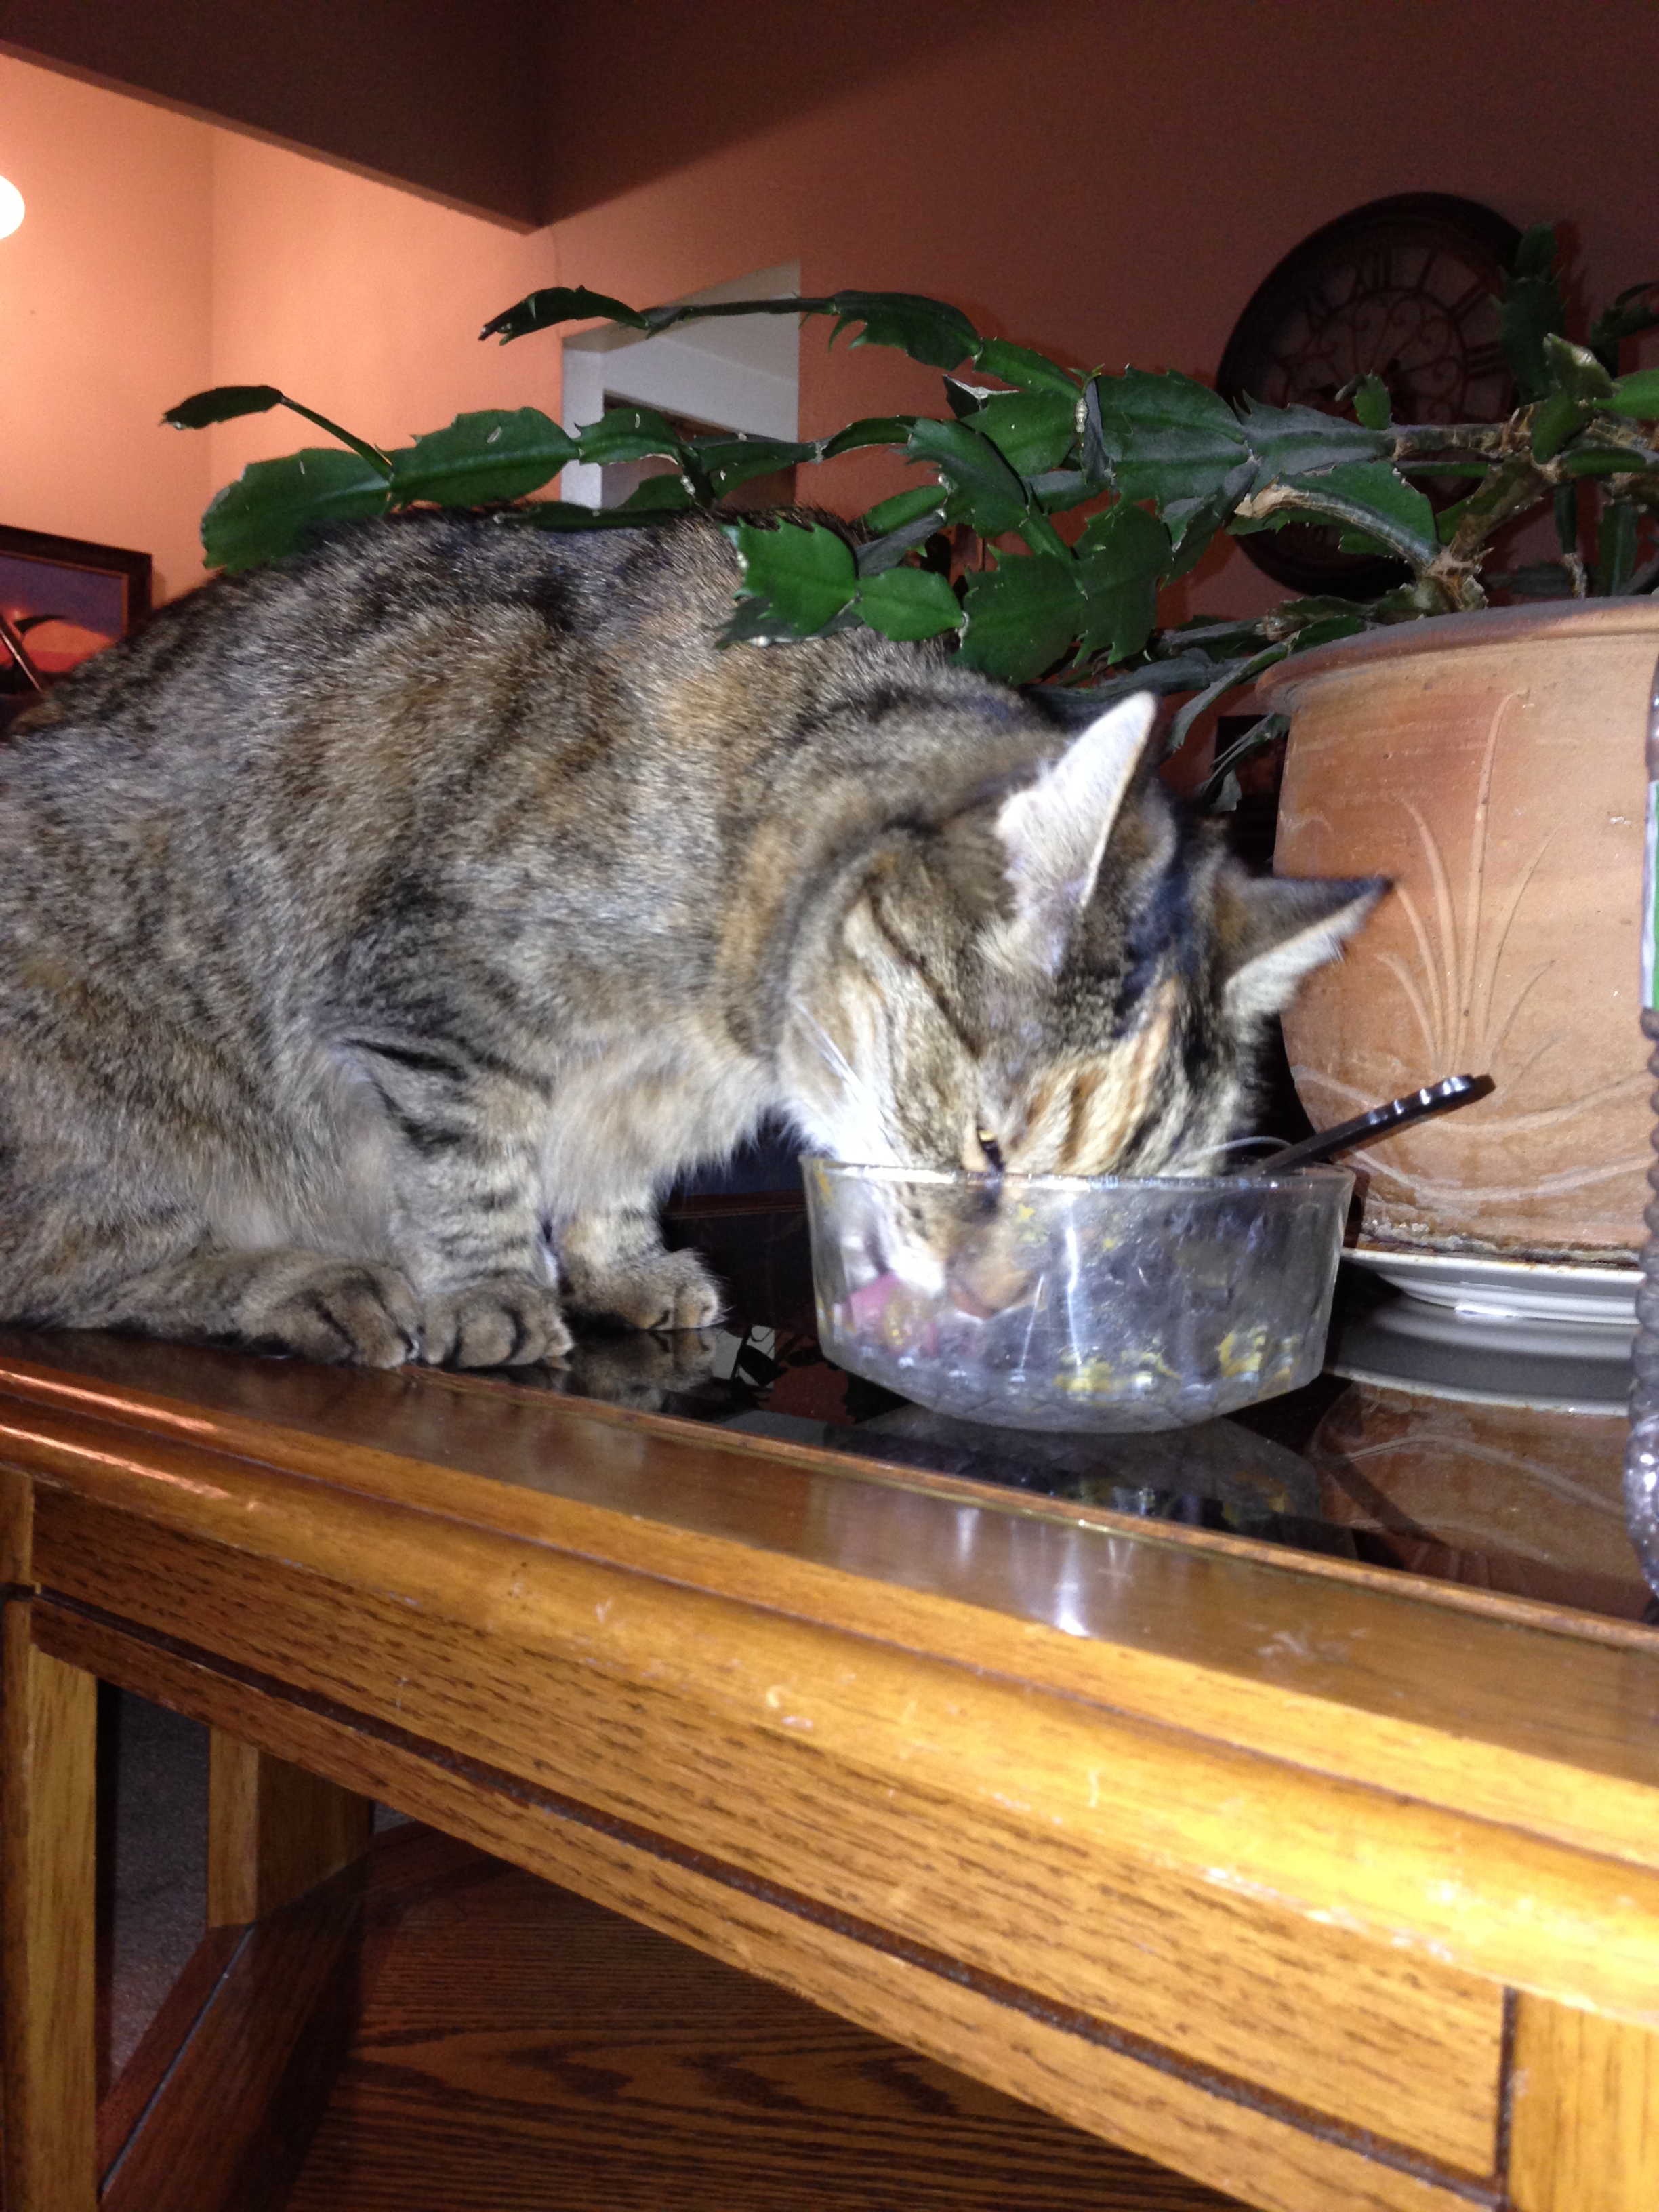 Ice cream was Nabisco's favorite food...we always made sure to let her lick our bowls. 